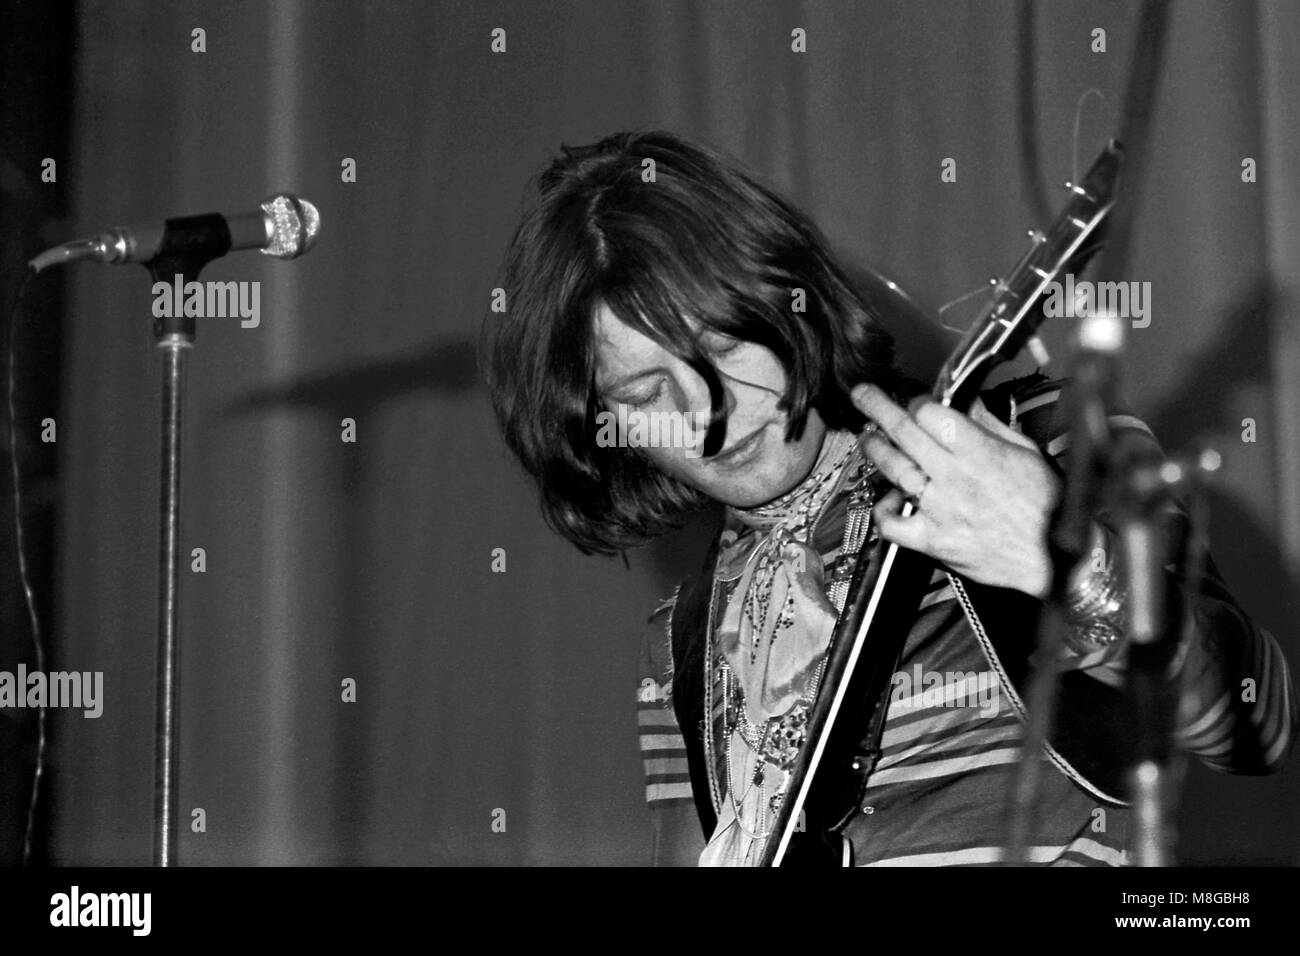 Guitarist Luther (Luke) Grosvenor performs with the UK progressive rock band Spooky Tooth at Bristol University’s Students’ Union on Saturday 1 March 1969 as part of that year’s RAG events.   In the 70s he played with Stealers Wheel, then moved to Mott the Hoople, changing his name to Ariel Bender. Stock Photo